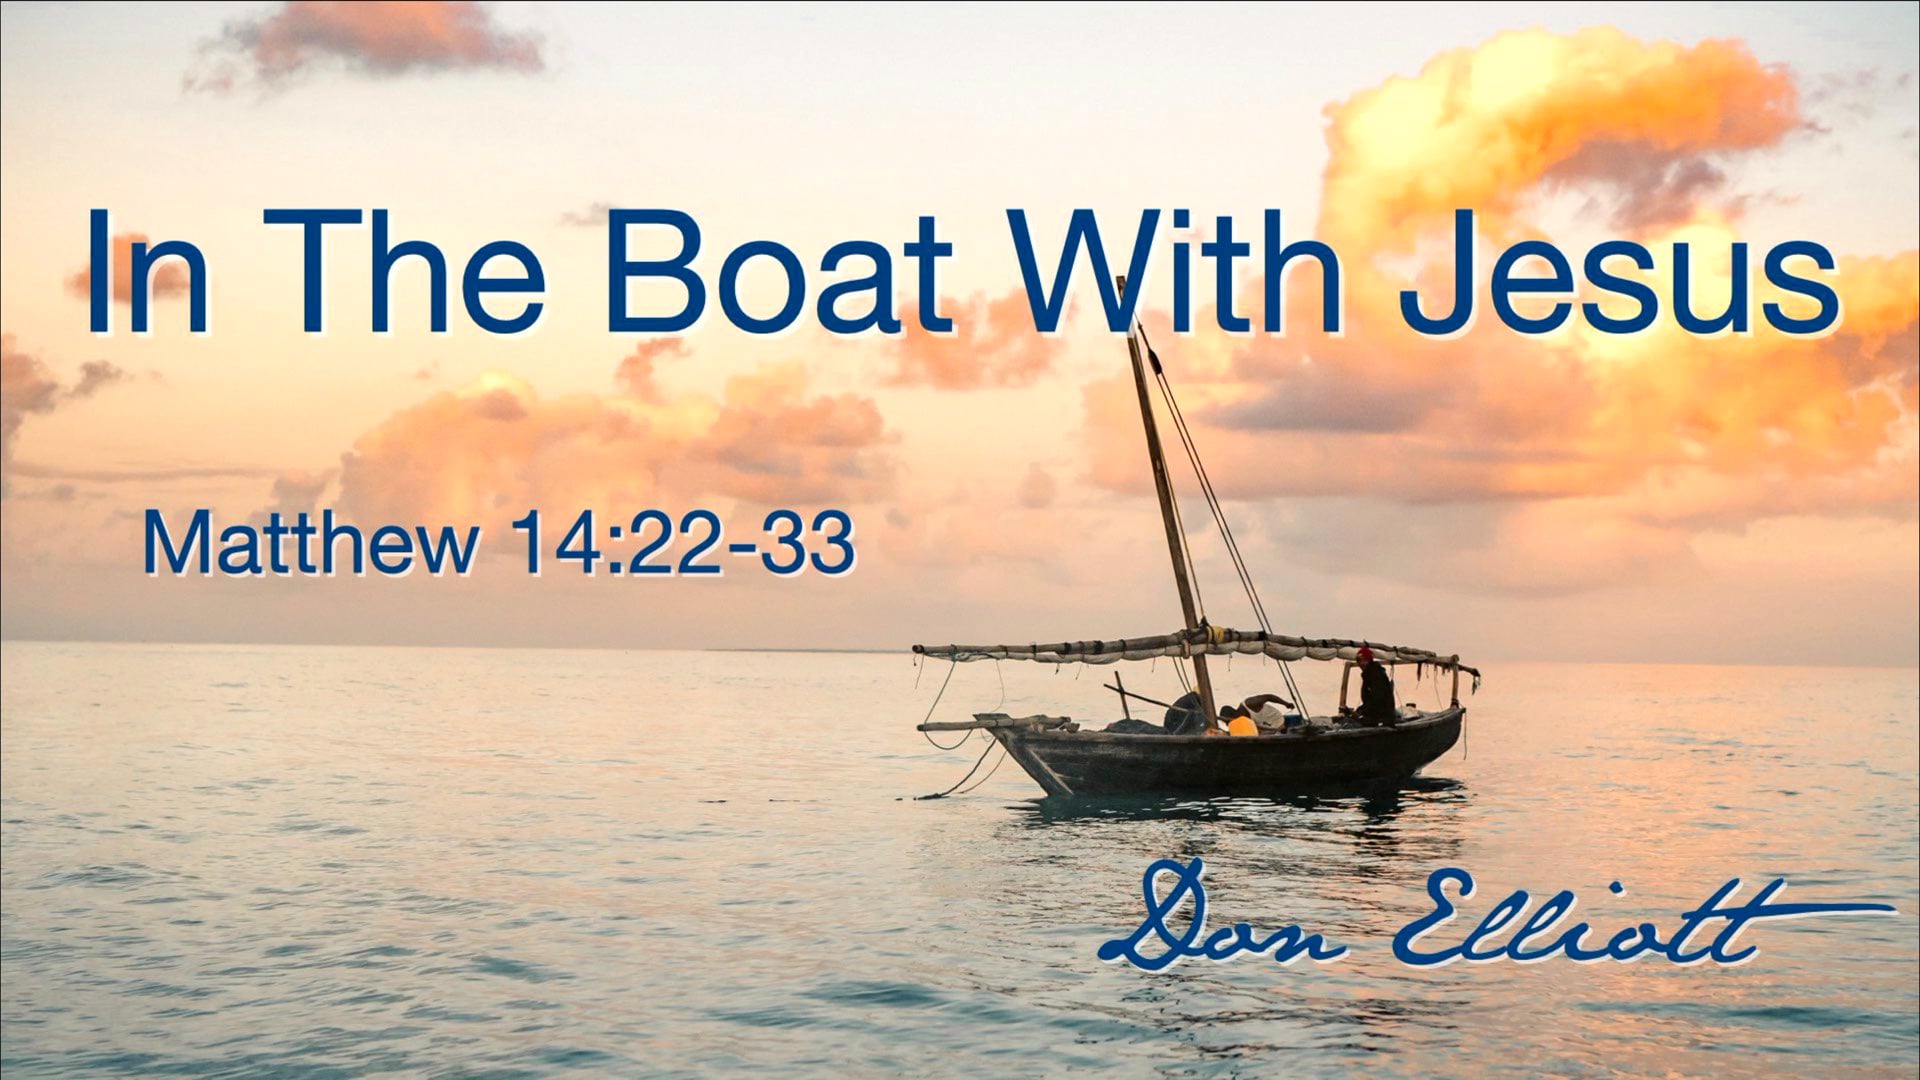 Oct 2, 2022 In The Boat With Jesus